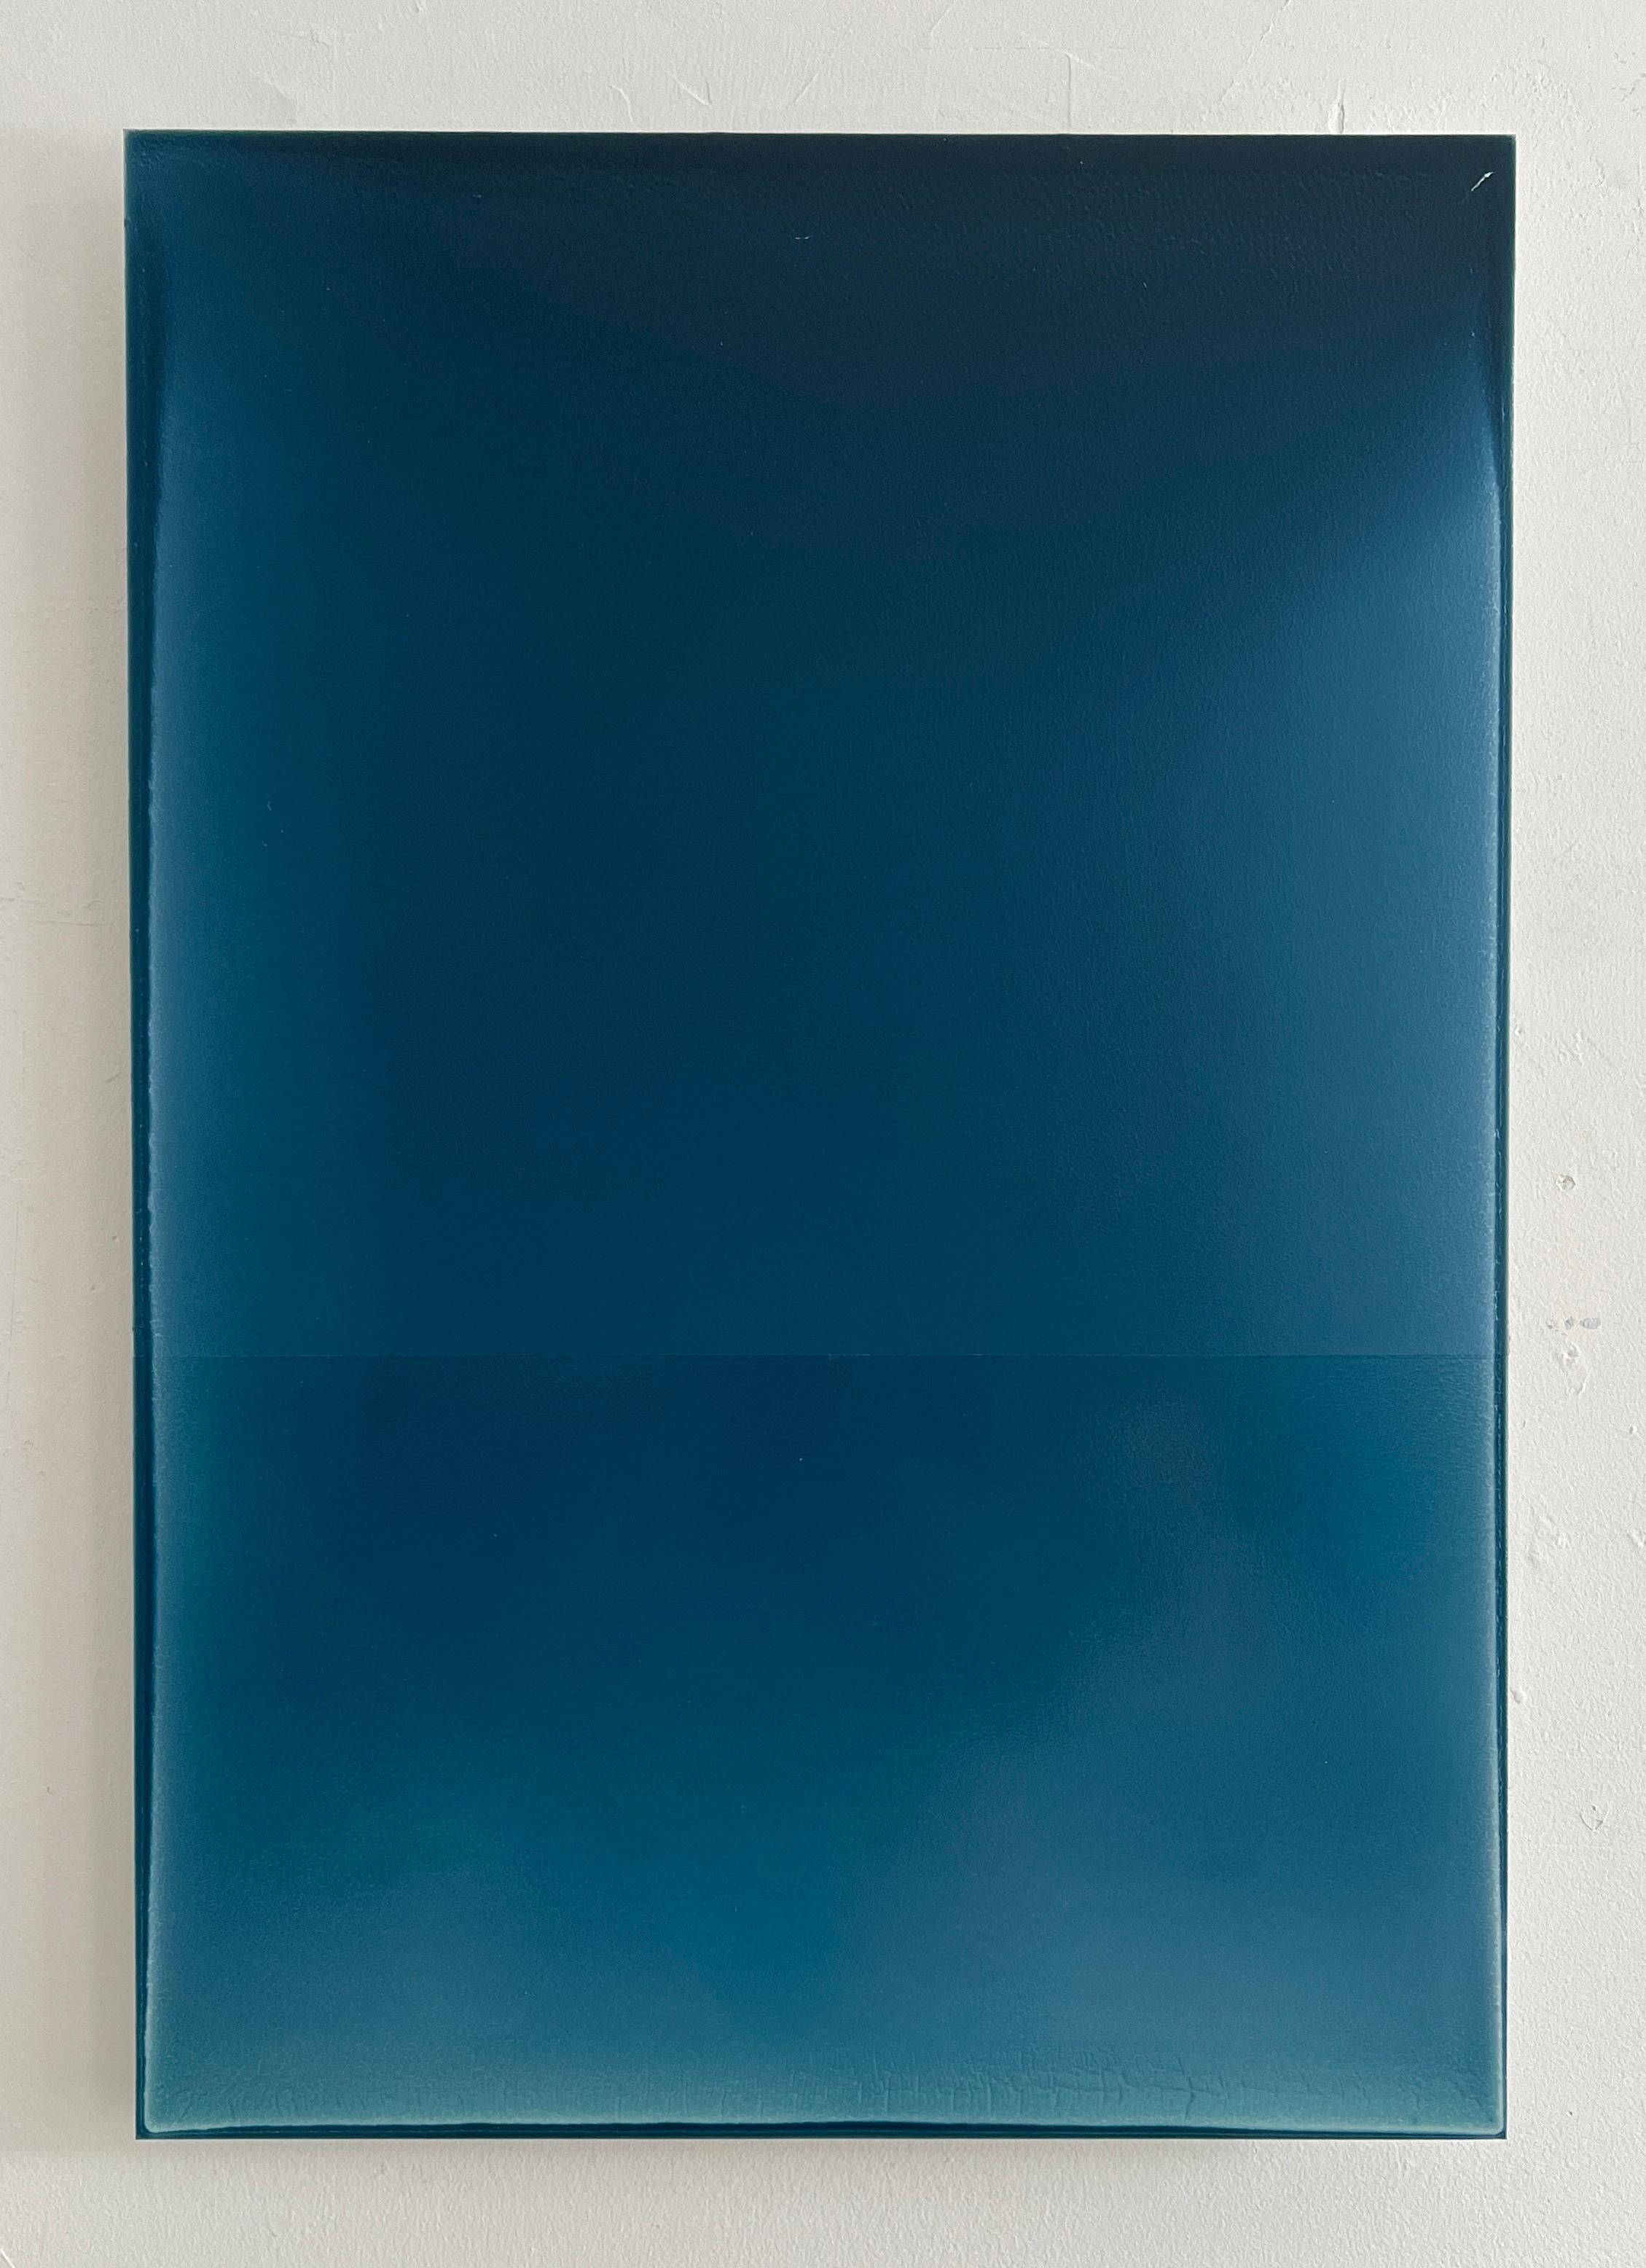 Weather No. 1 by Susan English is a wonderful play of color, light, and composition. The layers of English's tinted polymer on aluminum create the depth and surface textures throughout the dark indigo teal blue green painting. When installed, the